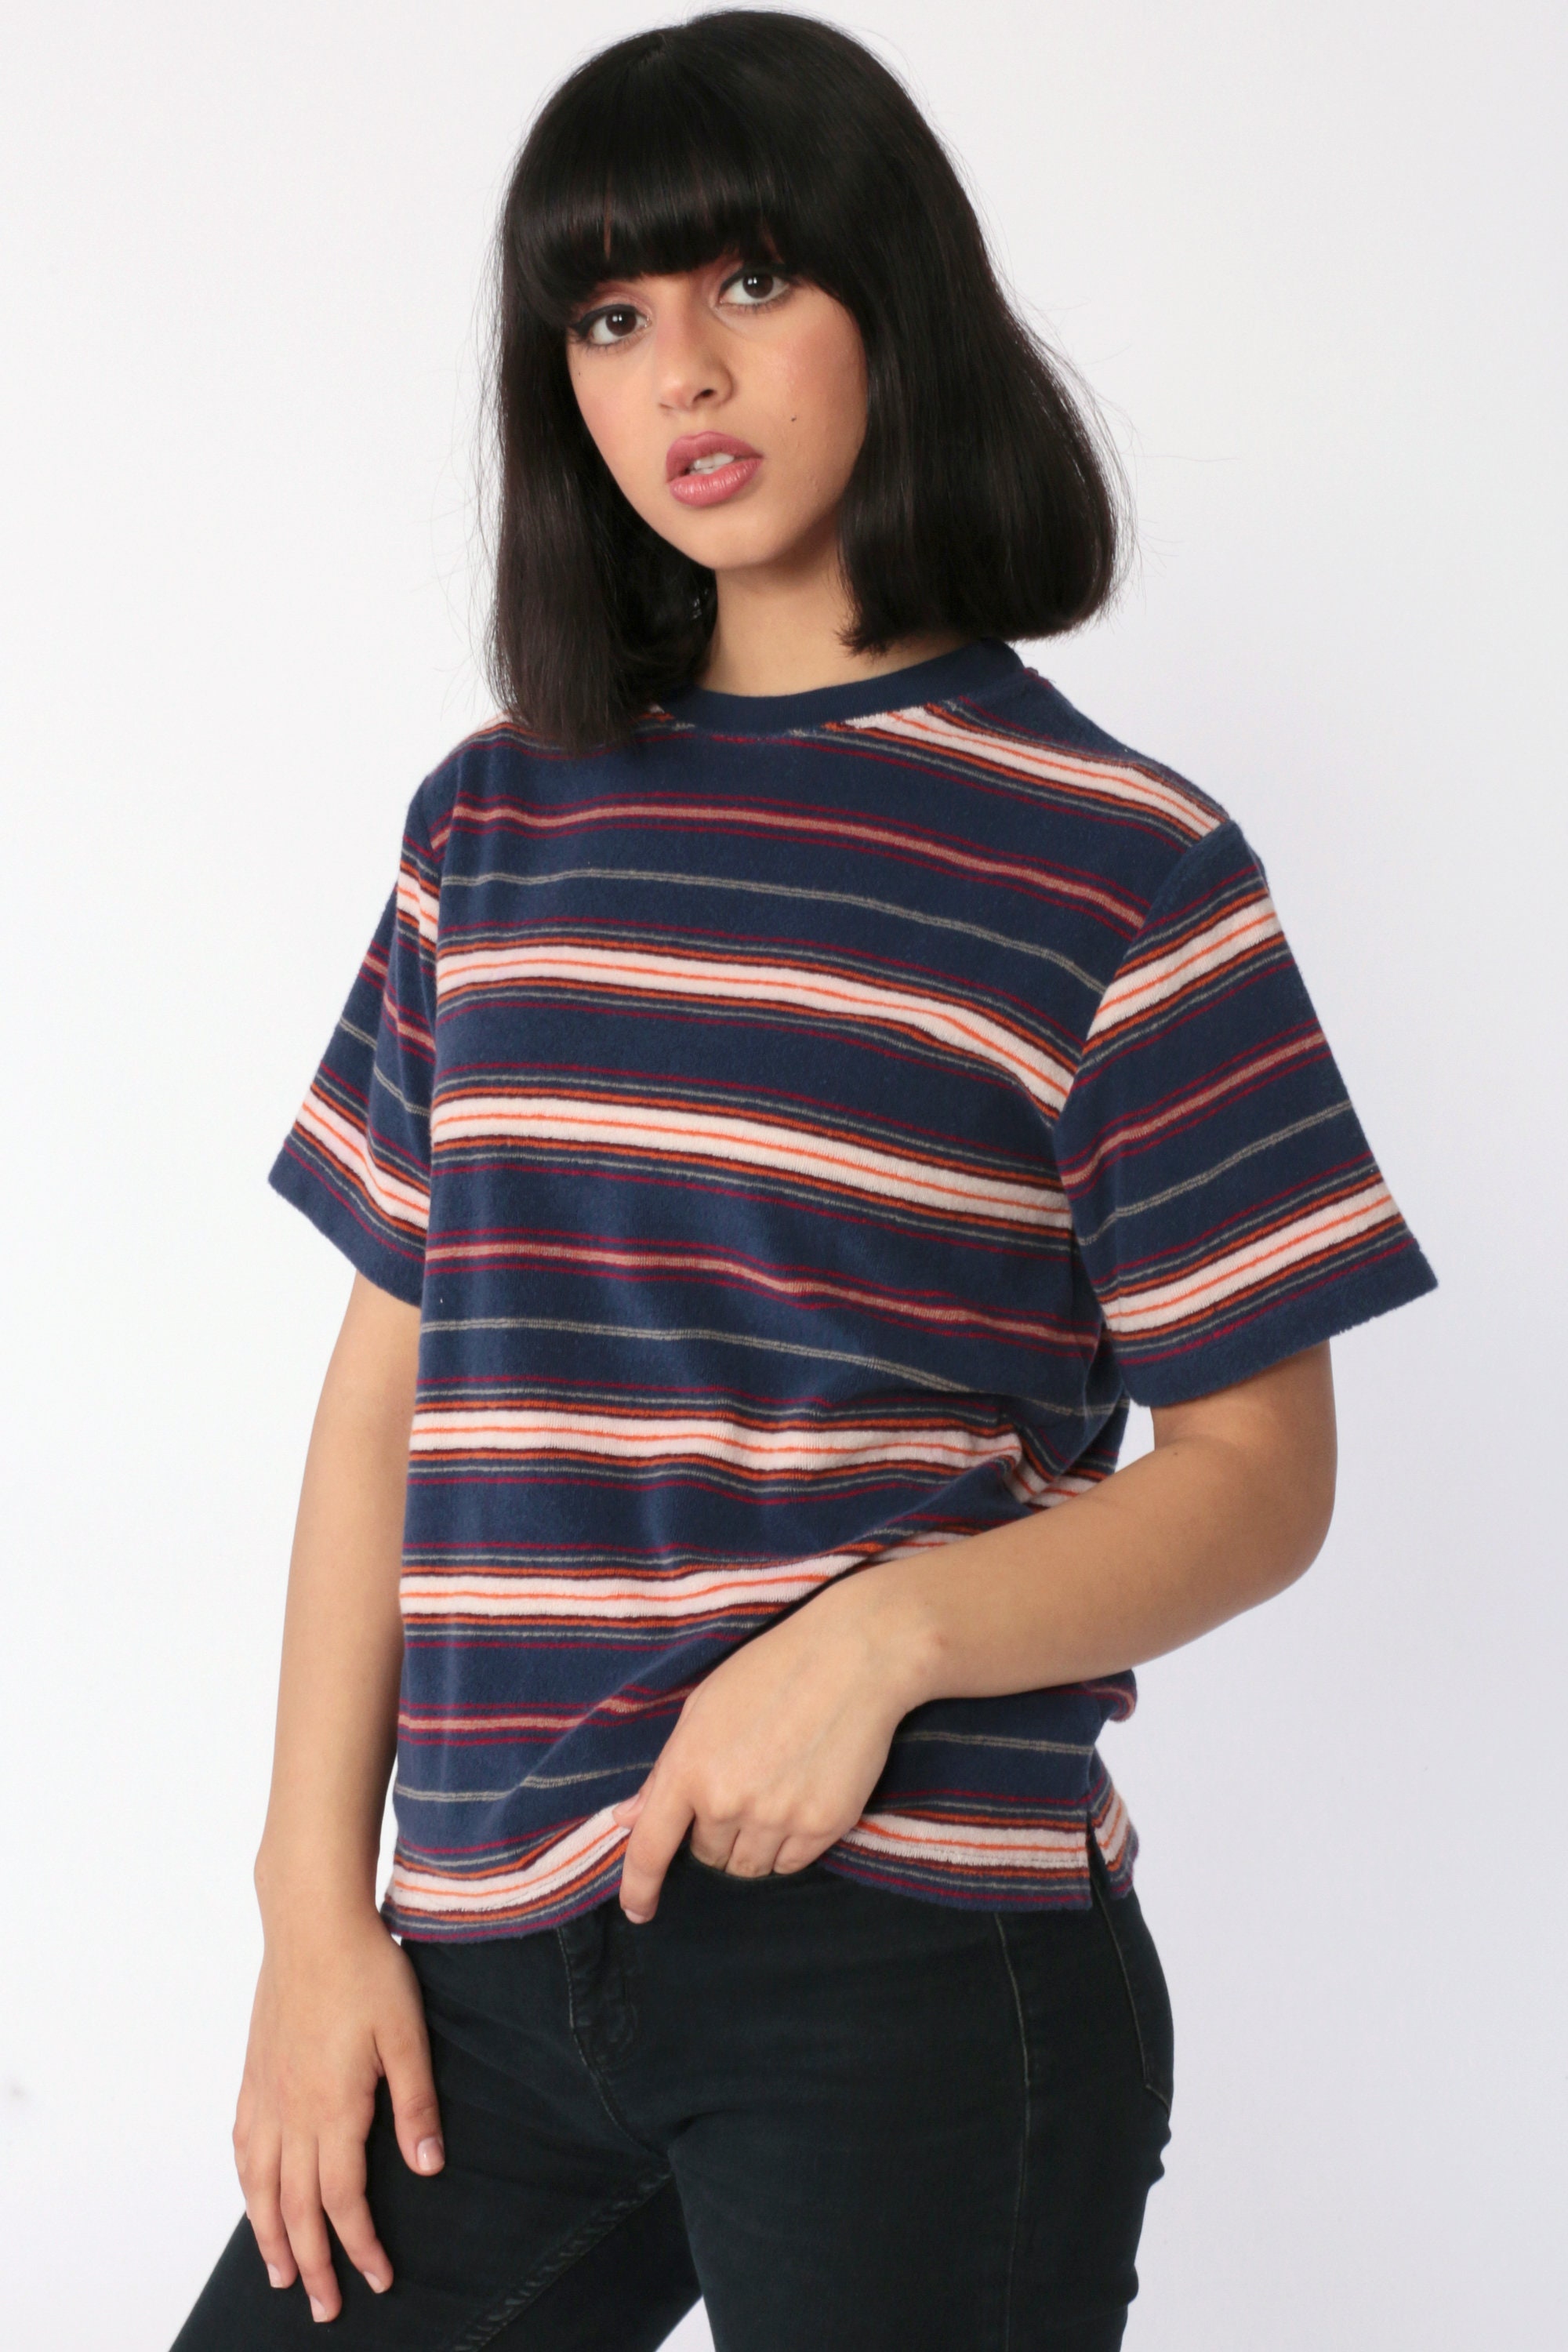 Striped Terry Cloth Shirt 90s Ringer Tee Route 66 Striped T Shirt Retro ...